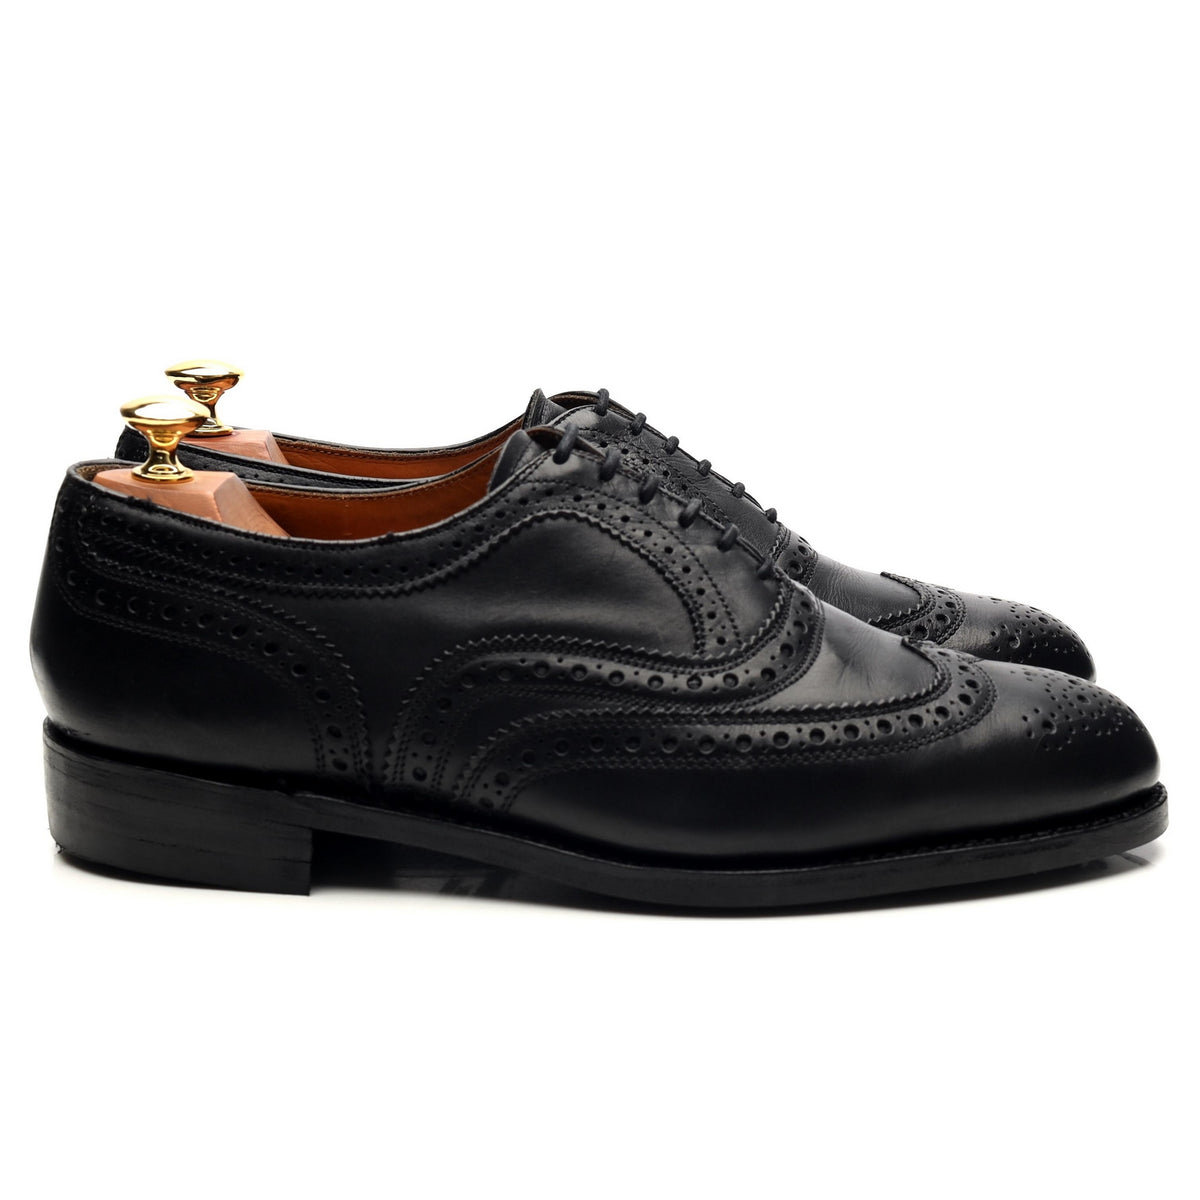 Black Leather Oxford Brogues UK 9